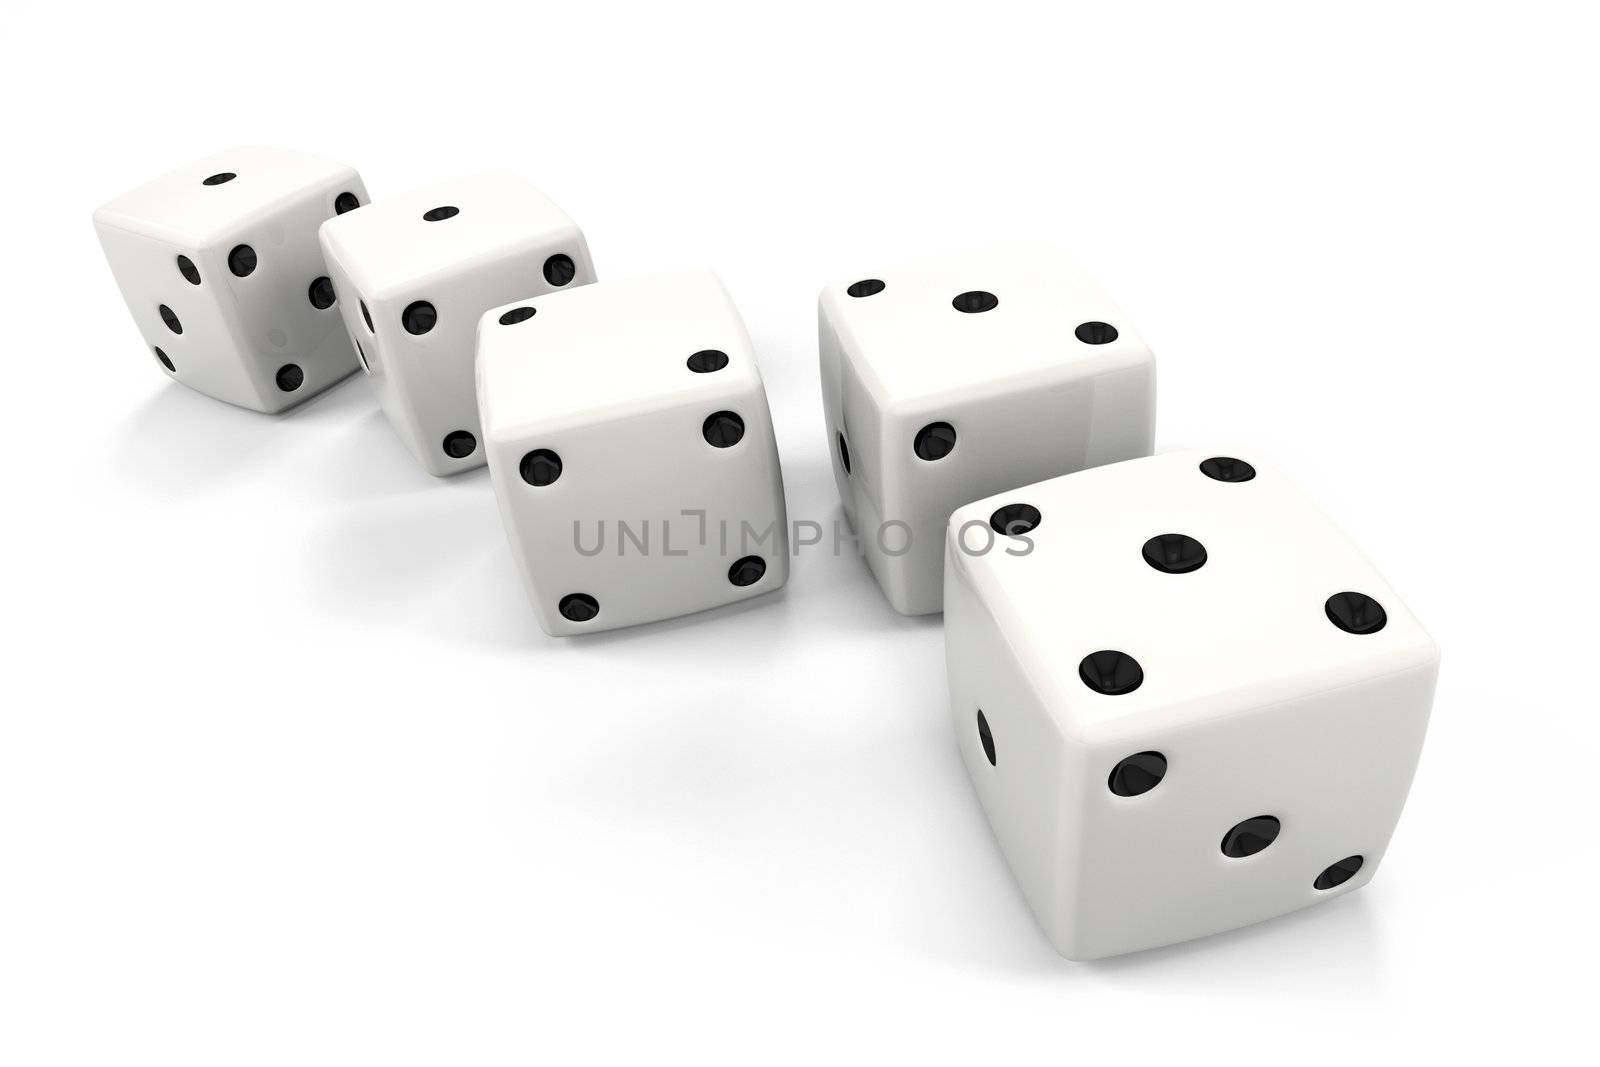 Six dice placed in order, the top numbers being in order of: One, One, Two, Three, Five, which are the beginning numbers of the Fibonacci sequence.